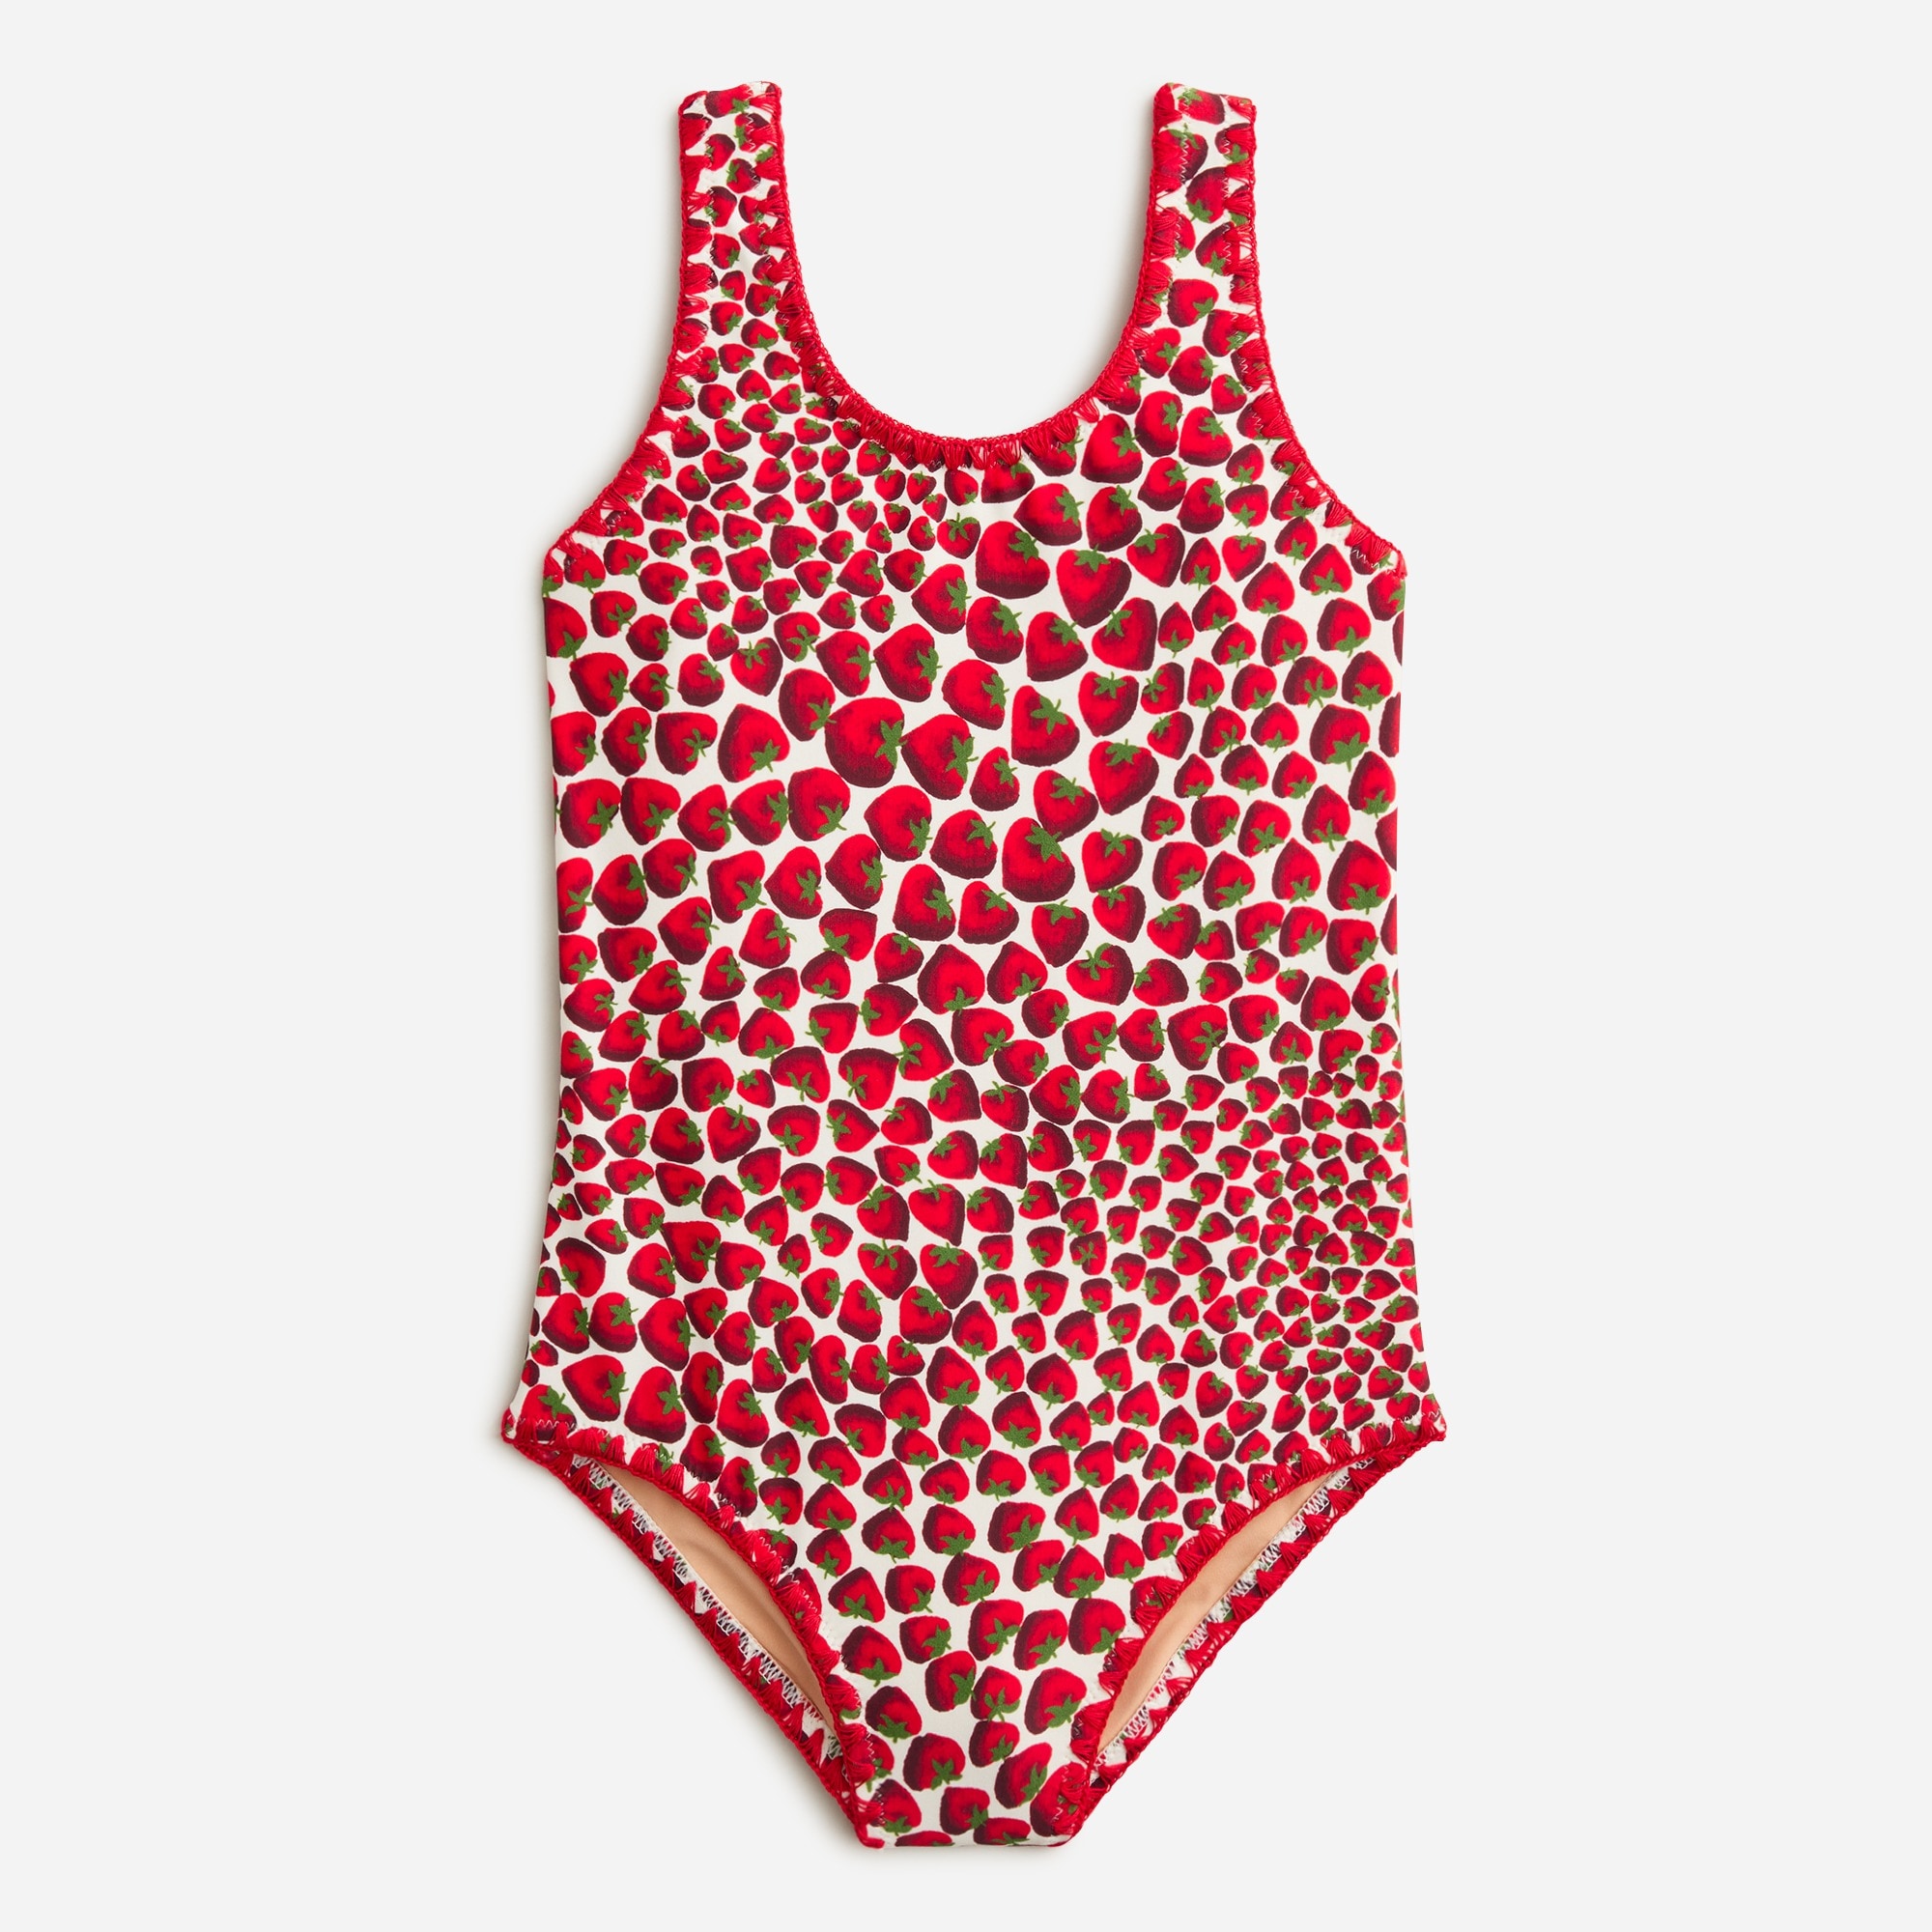 girls Girls' stitched one-piece swimsuit with UPF 50+